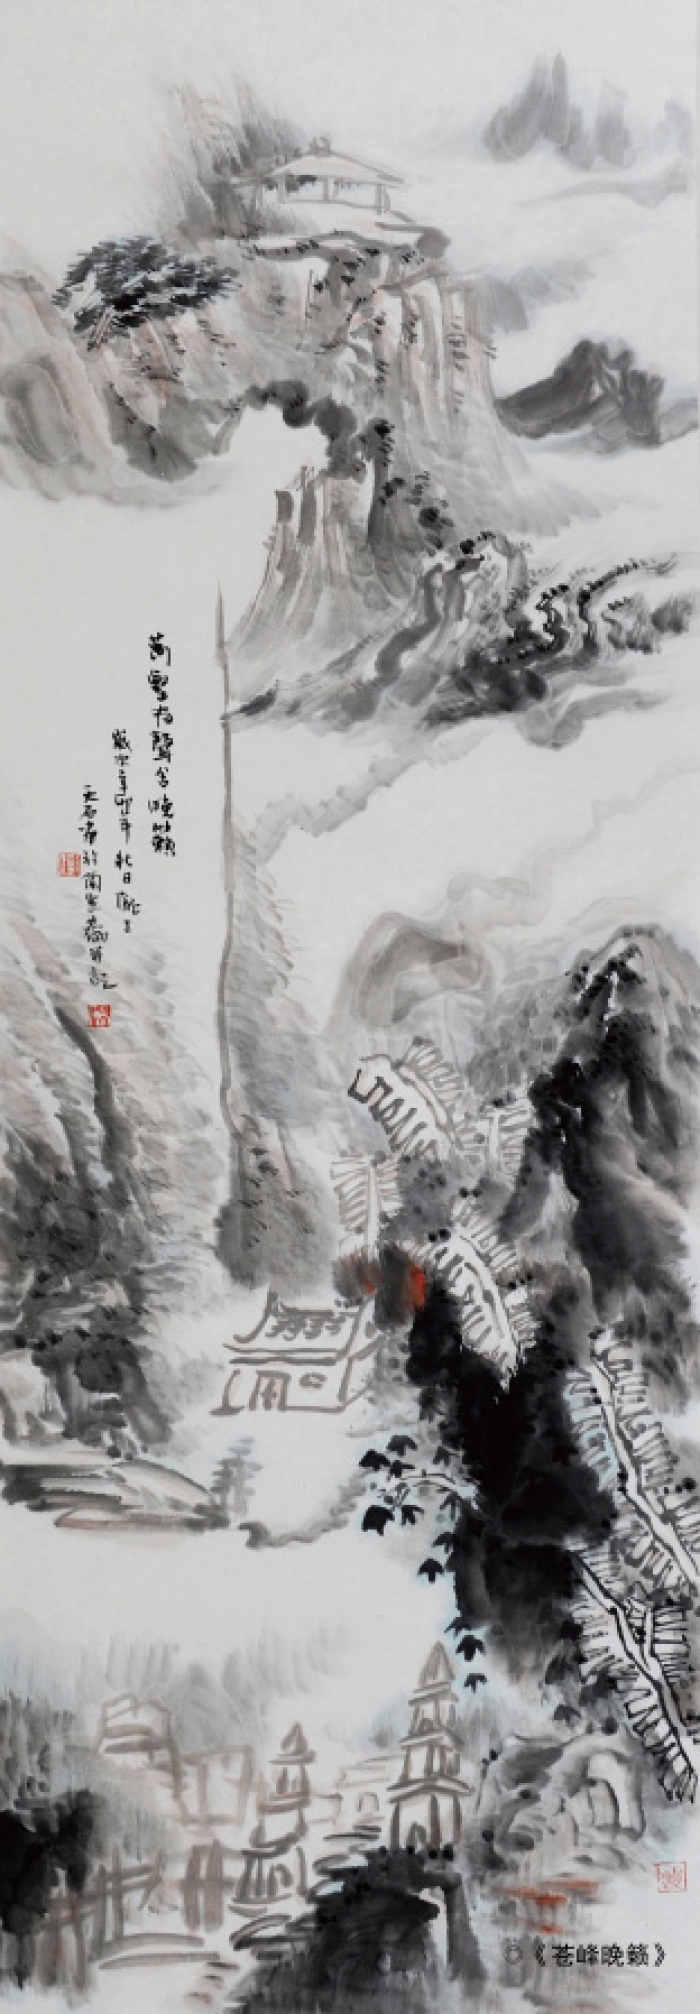 Liu Yuzhu's Contemporary Chinese Painting - One Night in the Green Mountain